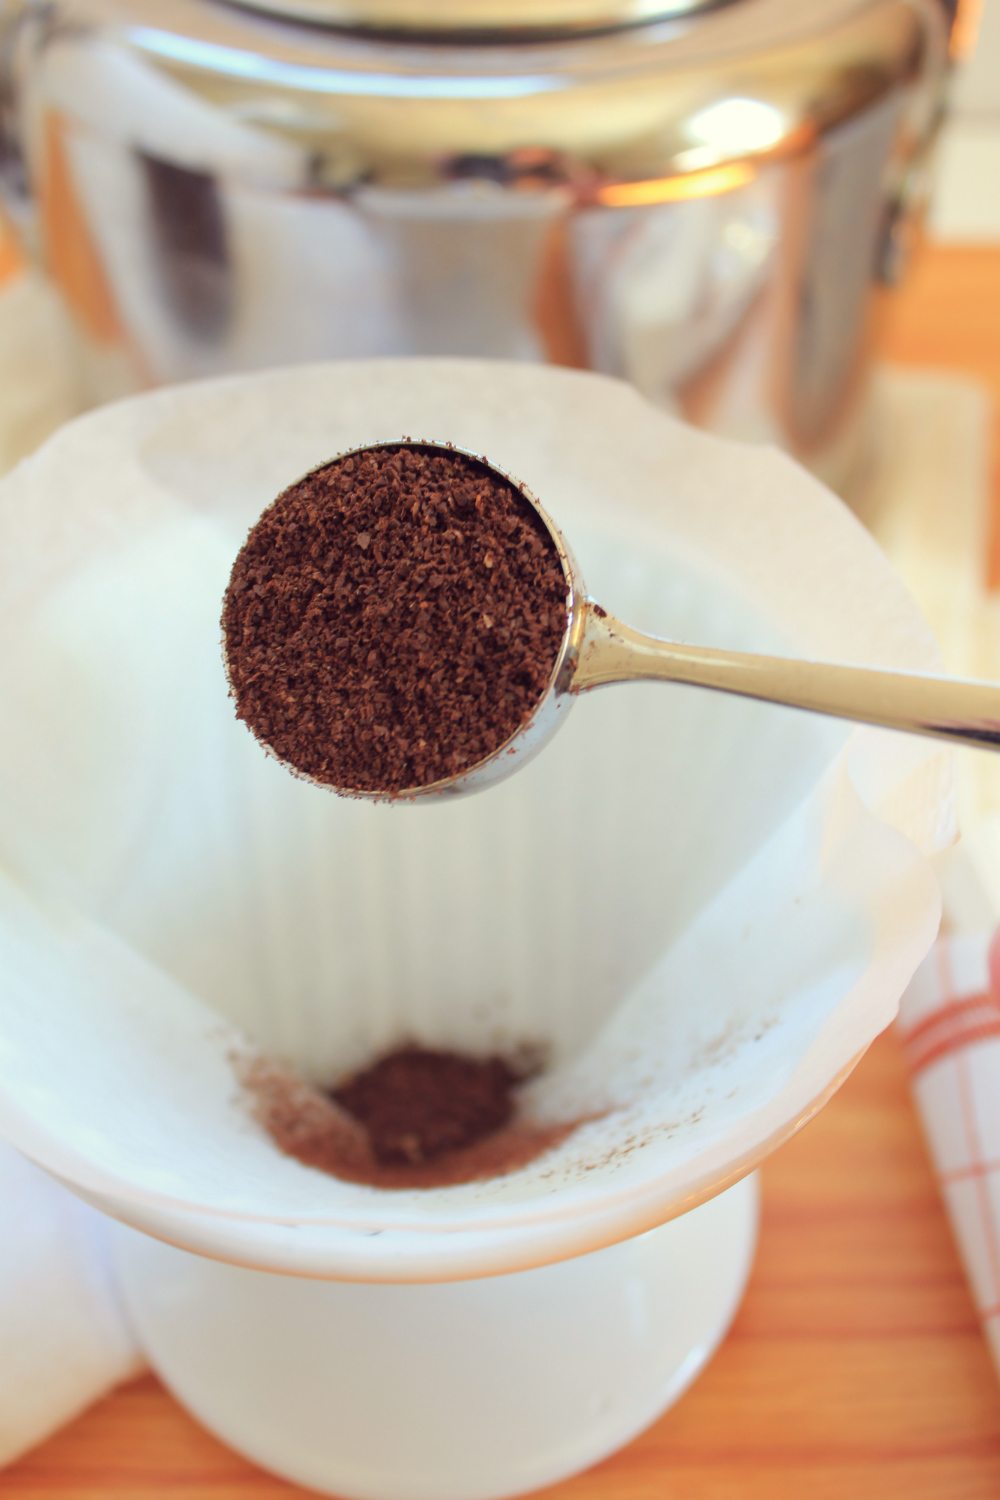 How To Make The Perfect Cup of Coffee | Darling Magazine